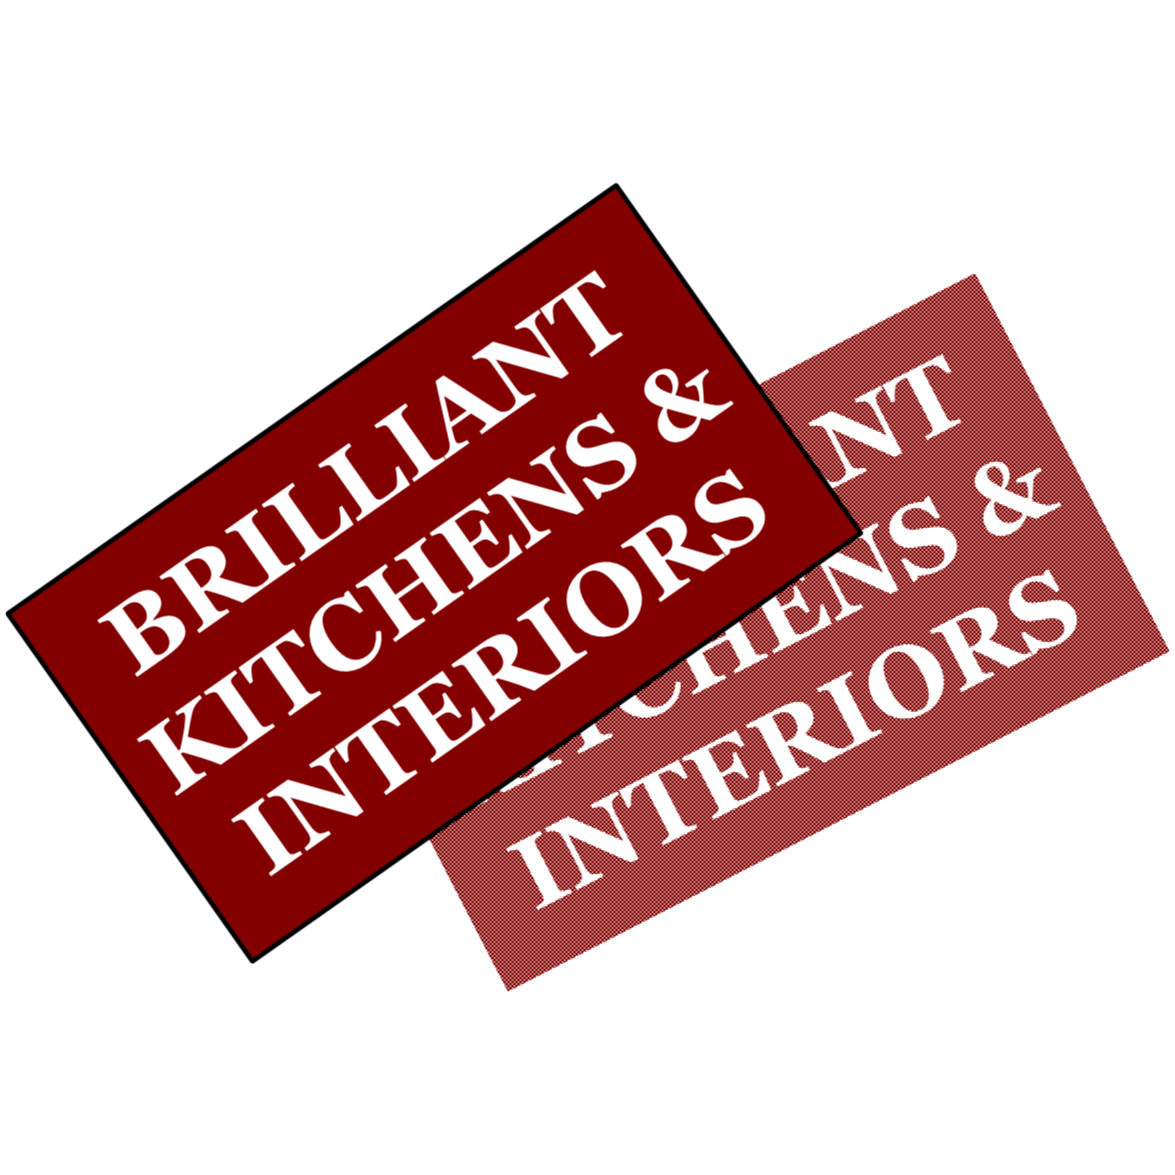 Brilliant Kitchens and Interiors - Winnellie, NT 0820 - (08) 8947 3444 | ShowMeLocal.com